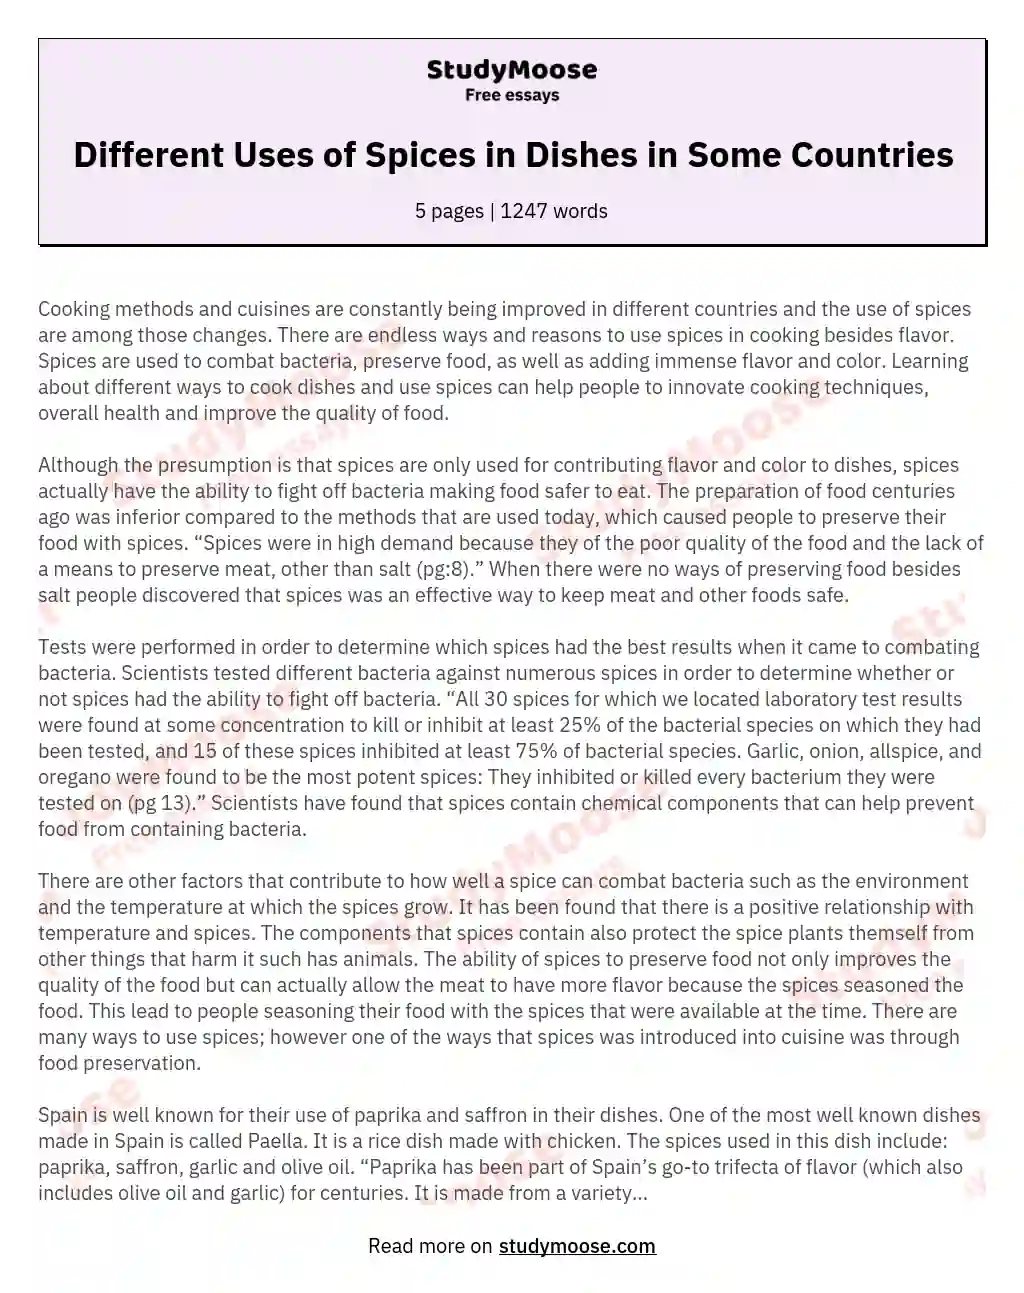 Different Uses of Spices in Dishes in Some Countries essay